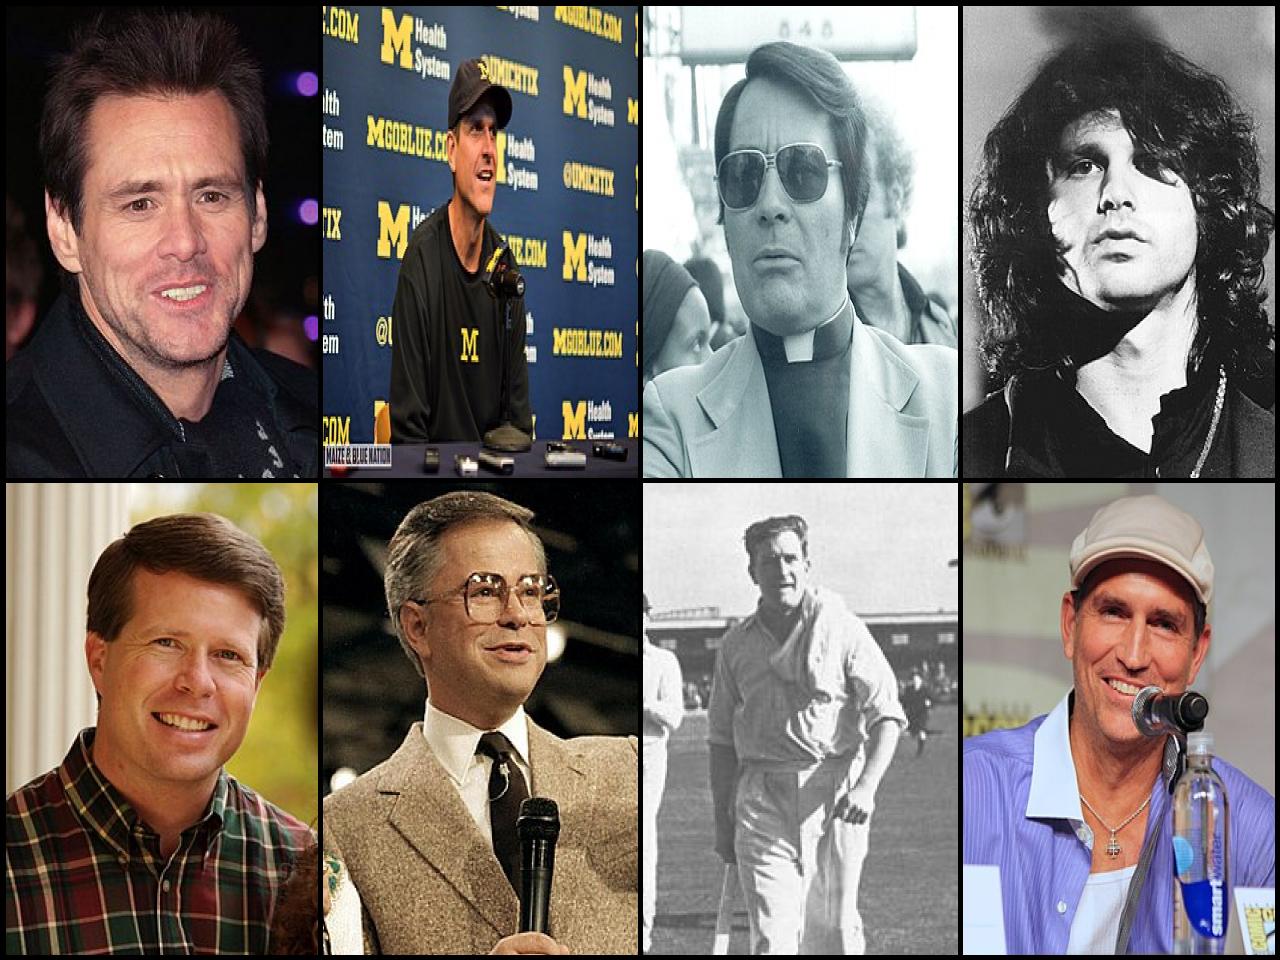 List of Famous people named <b>Jim</b>